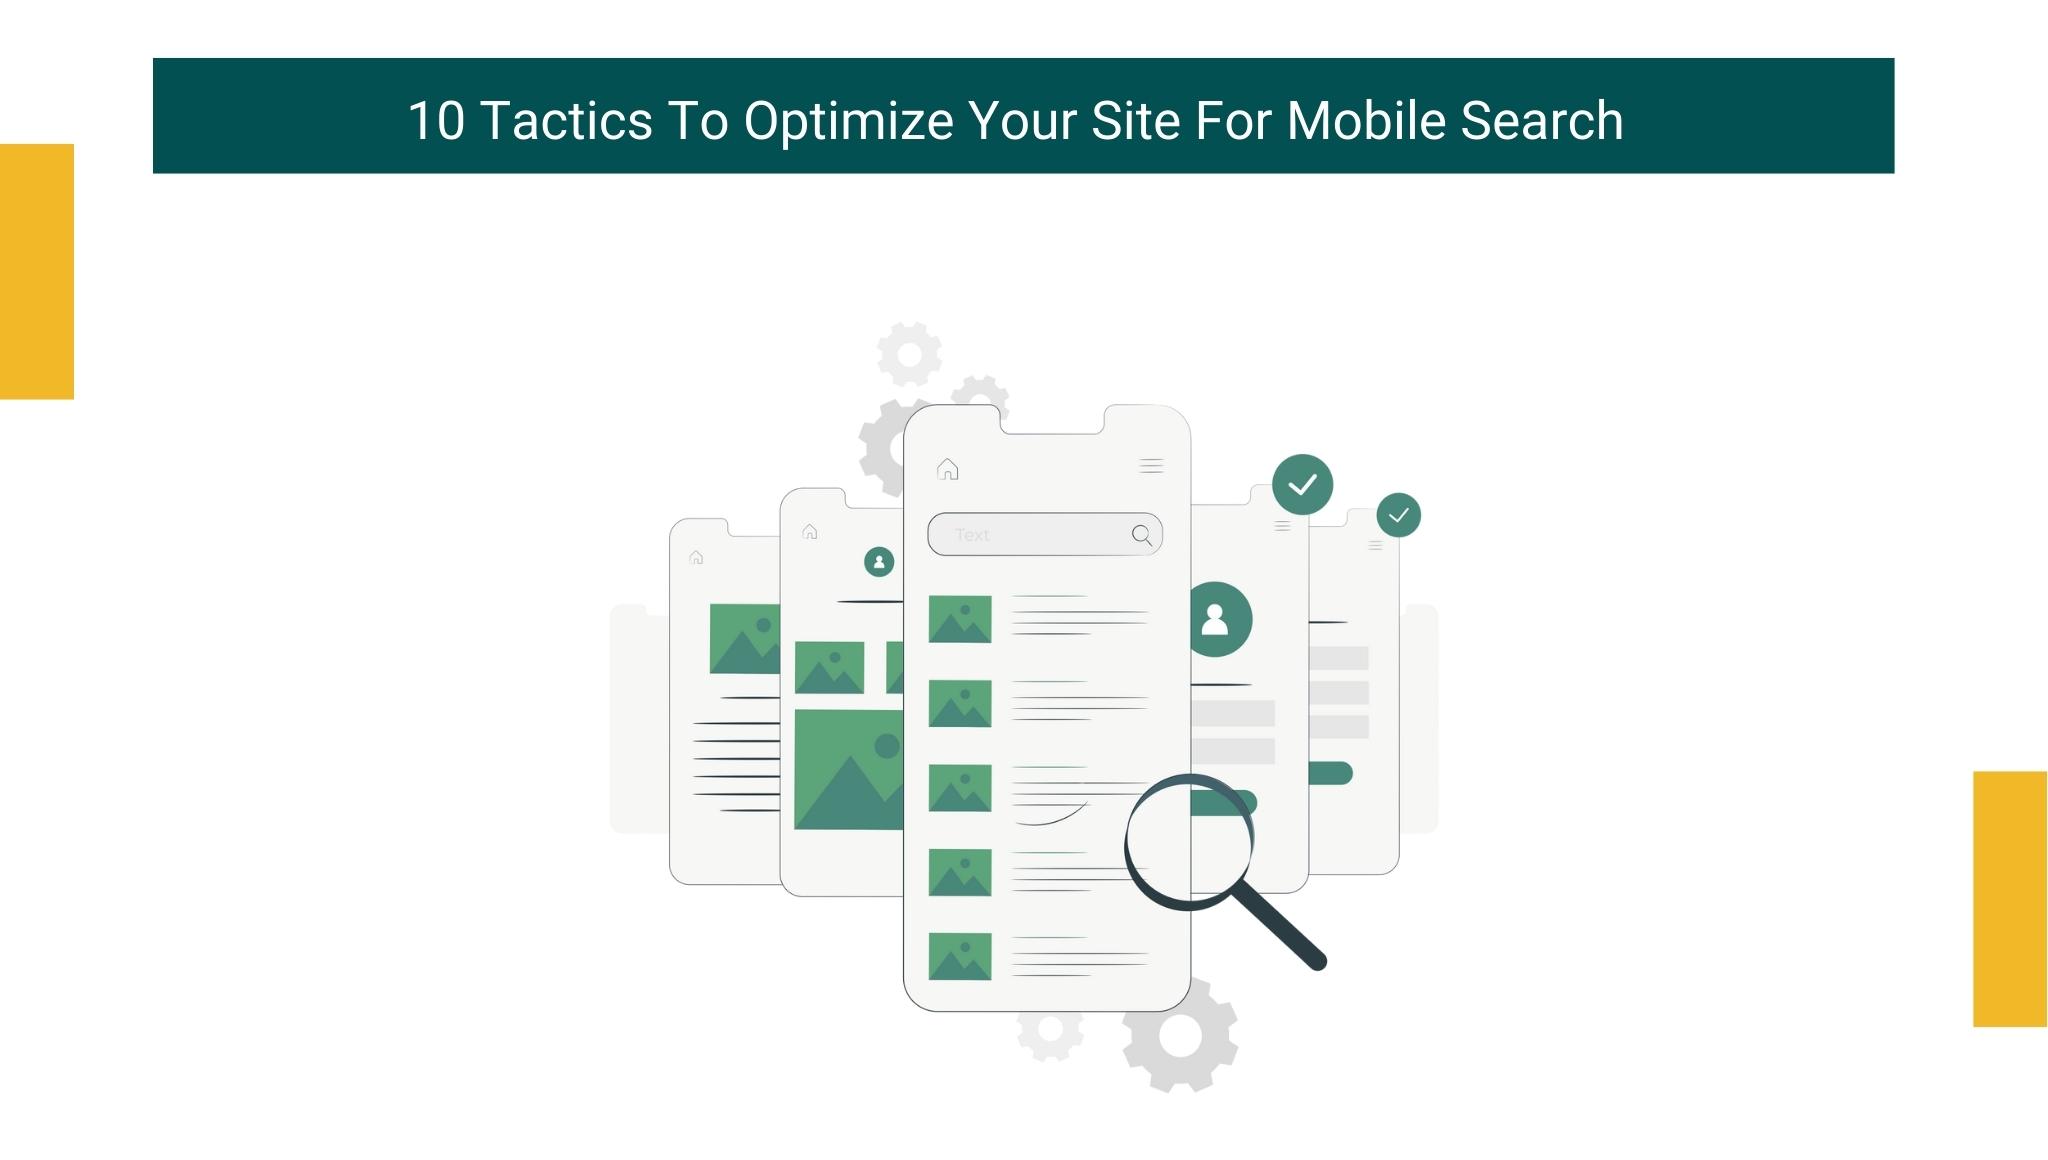 10 tactics to optimize your site for mobile search